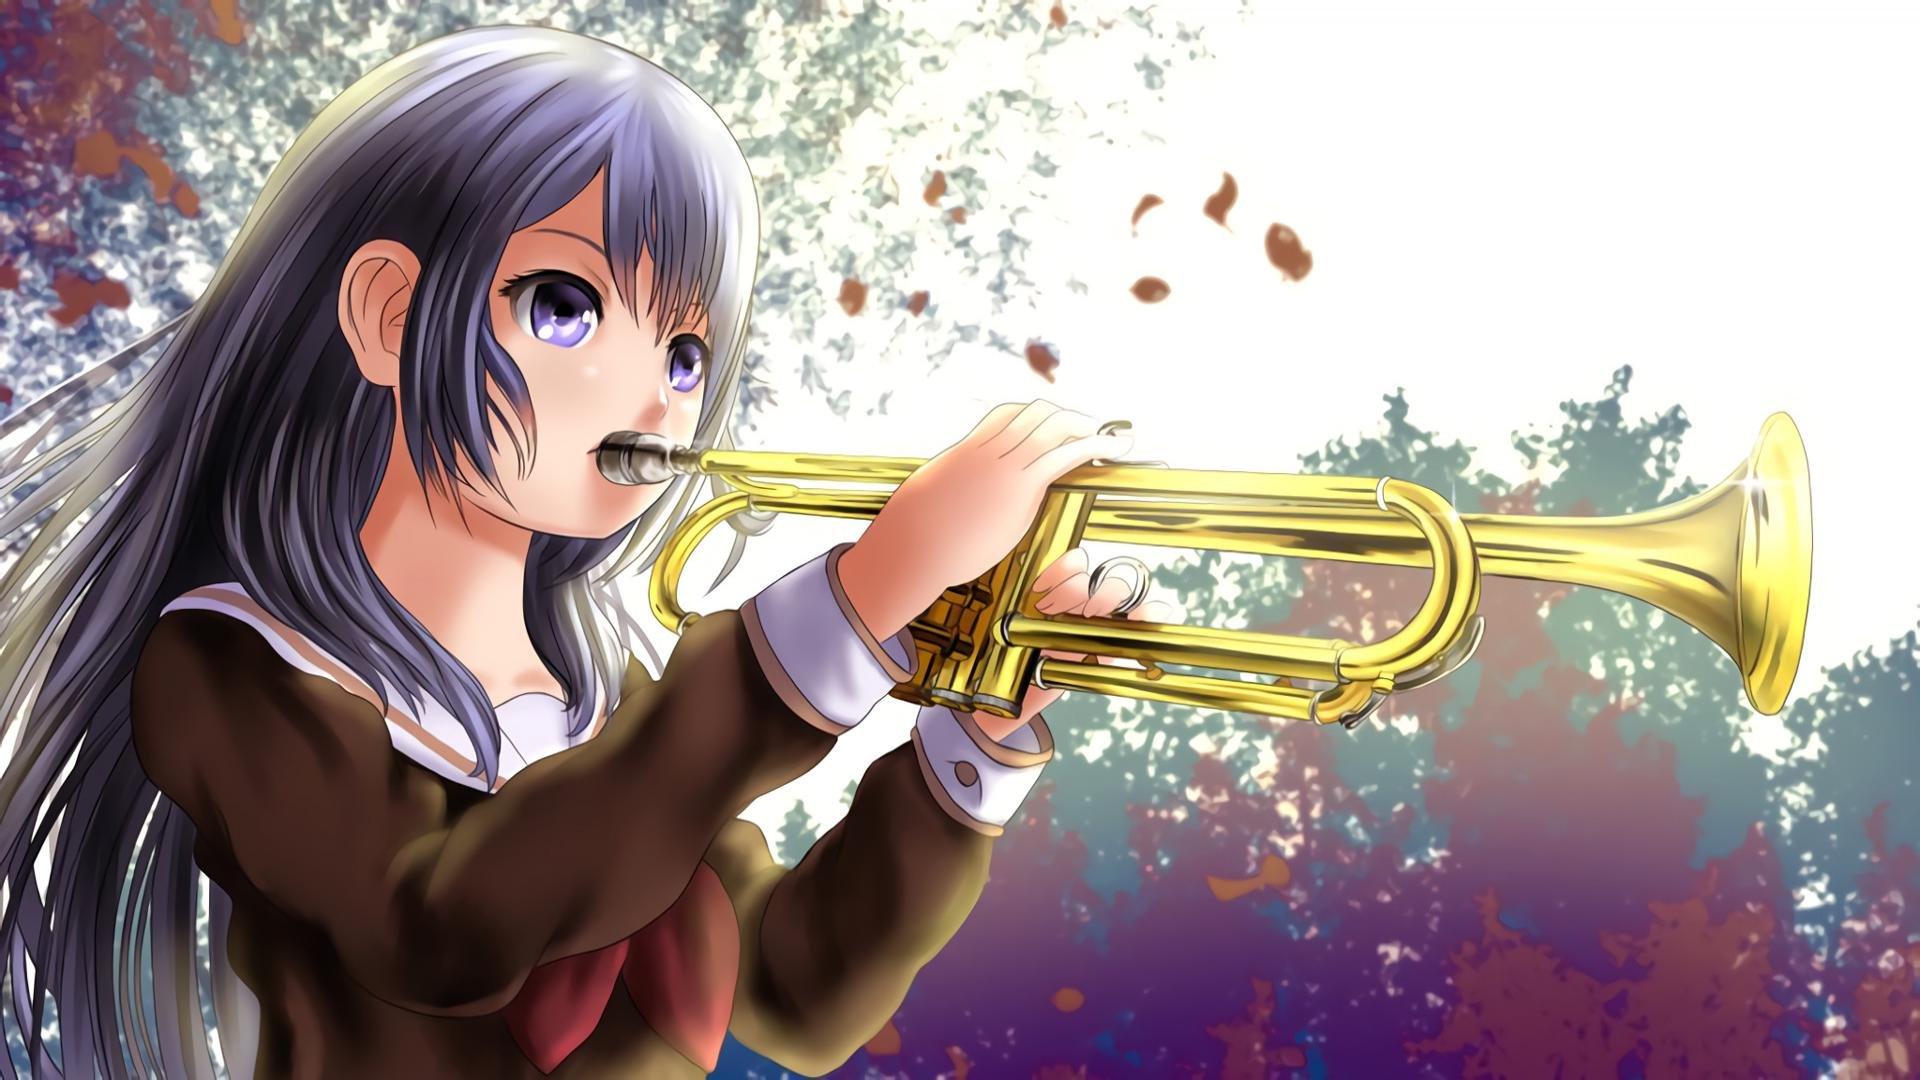 Trumpet - Musical Instrument | page 7 of 30 - Zerochan Anime Image Board